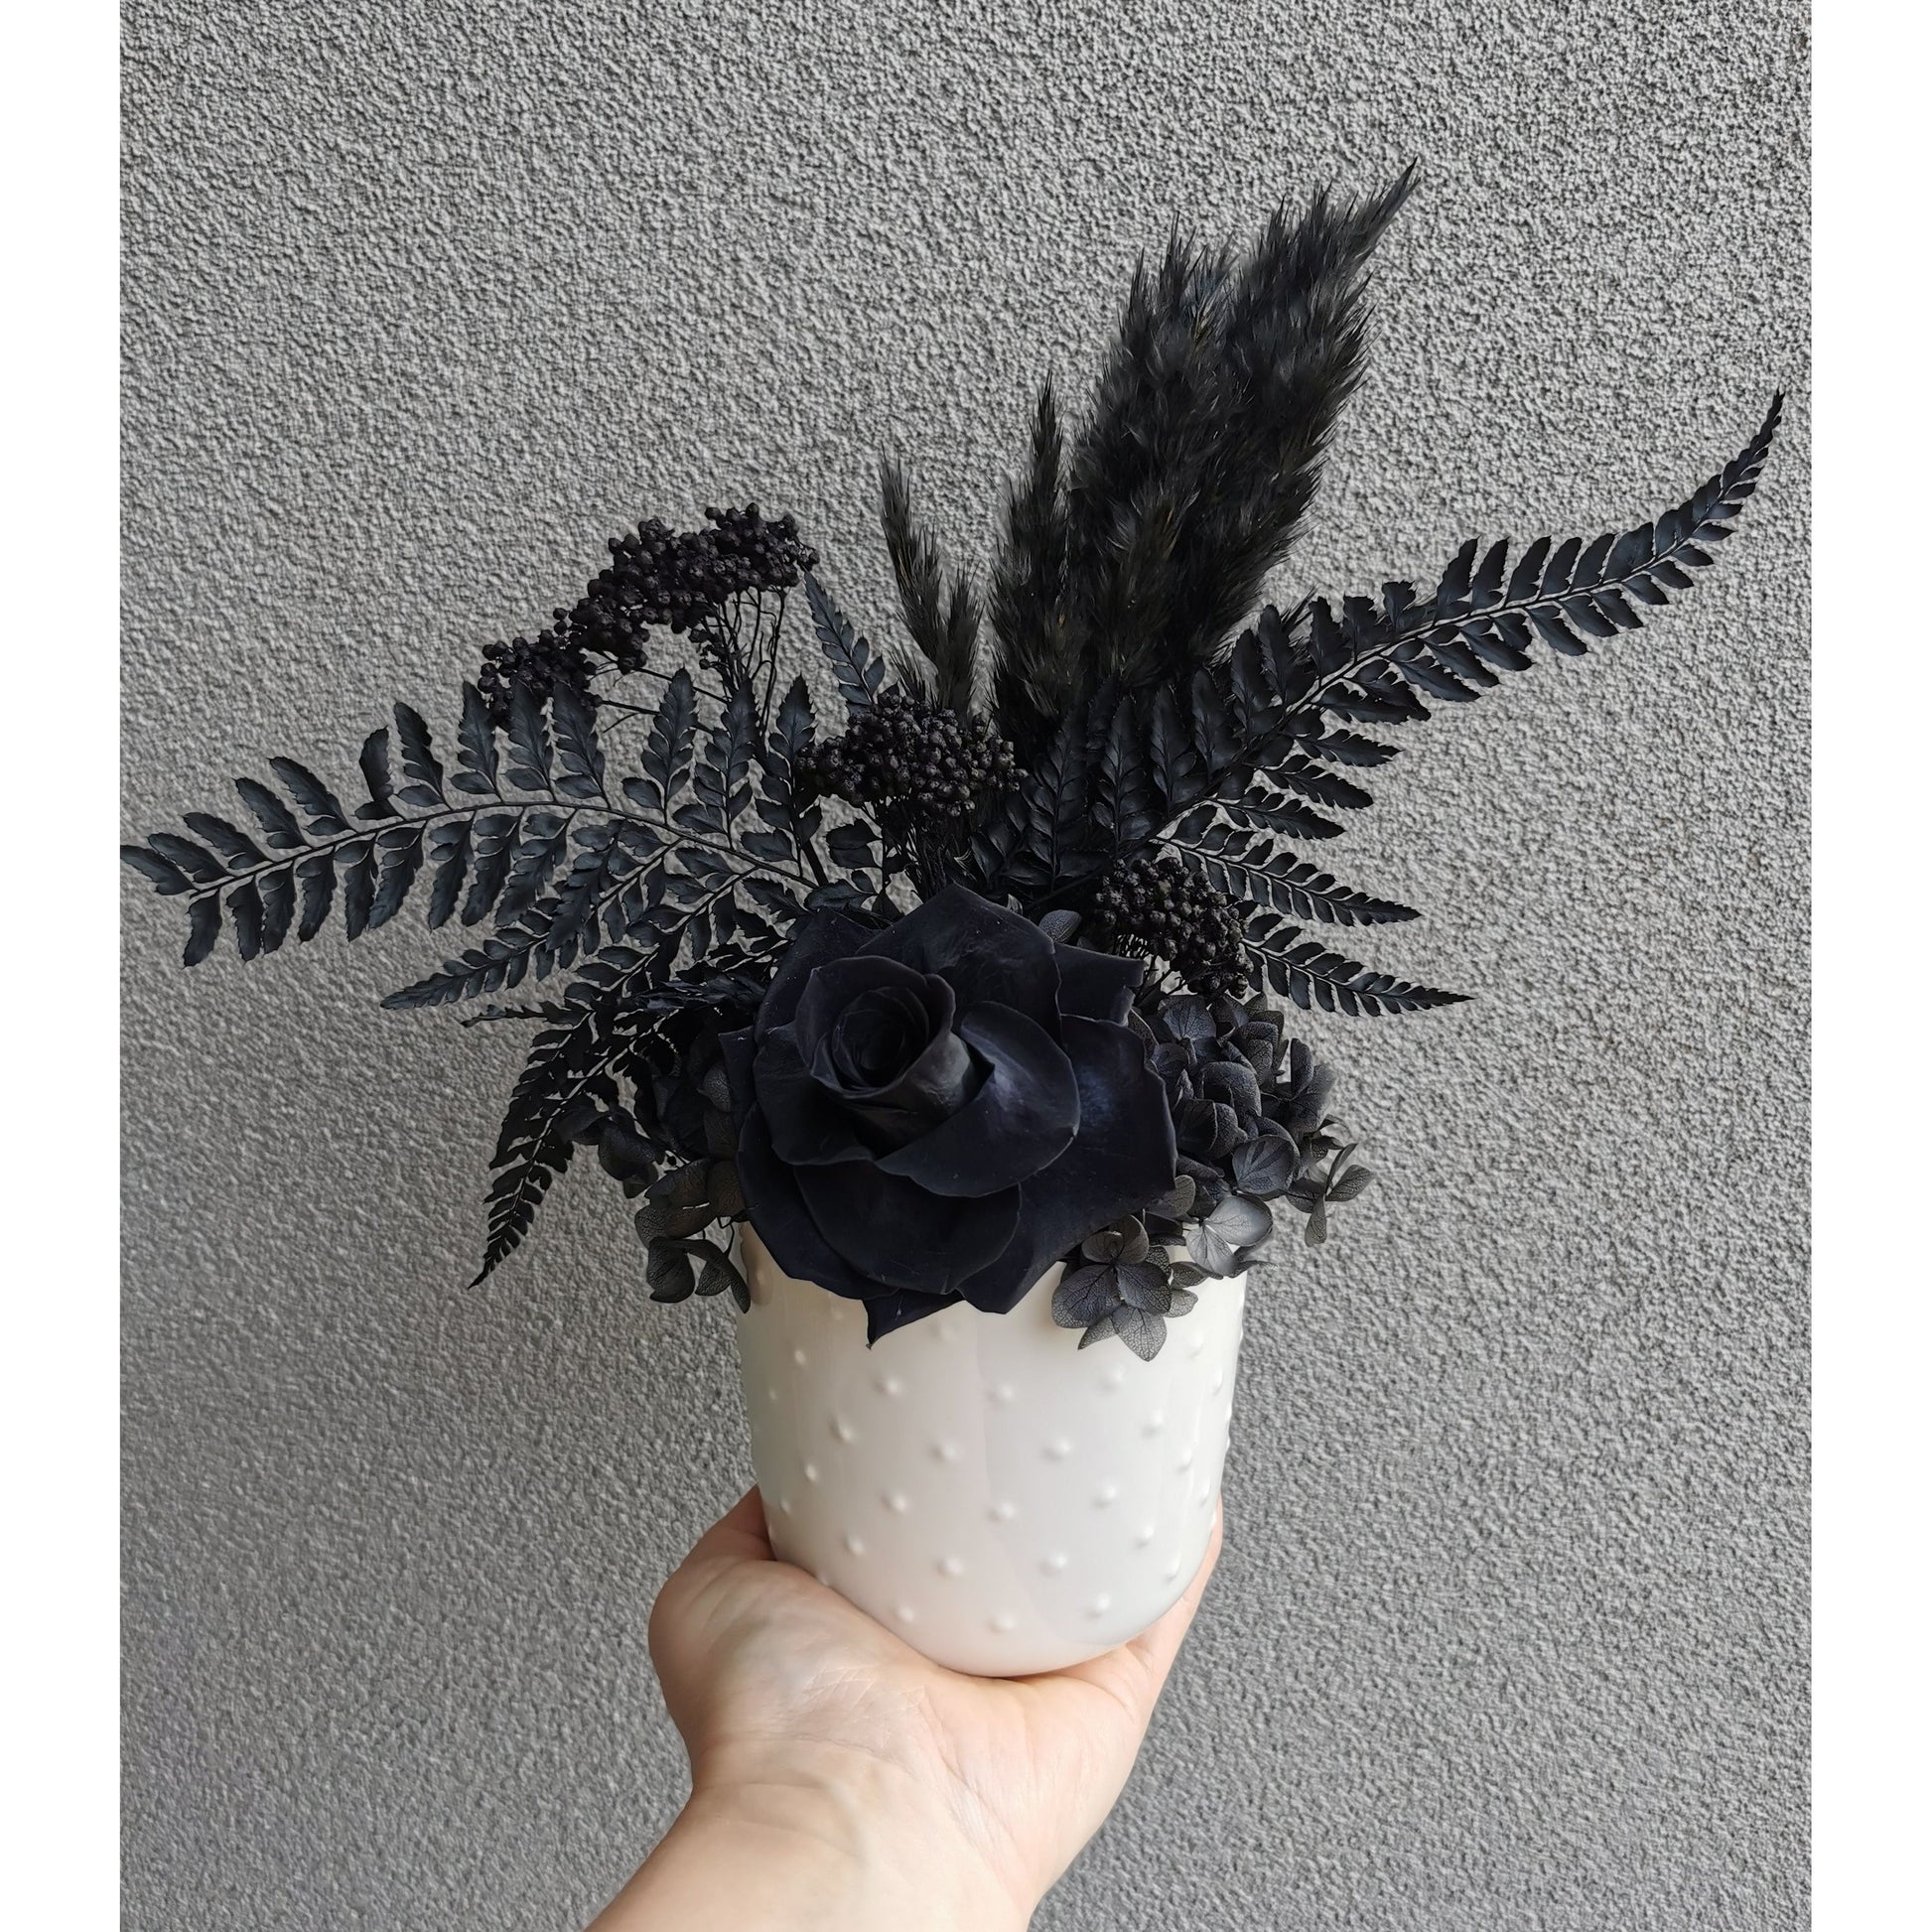 Dried & Preserved flower arrangement featuring all black flowers including a rose, pampas grass, hydrangea, rice flower & ferns. Photo shows arrangement being held by hand against a blank wall